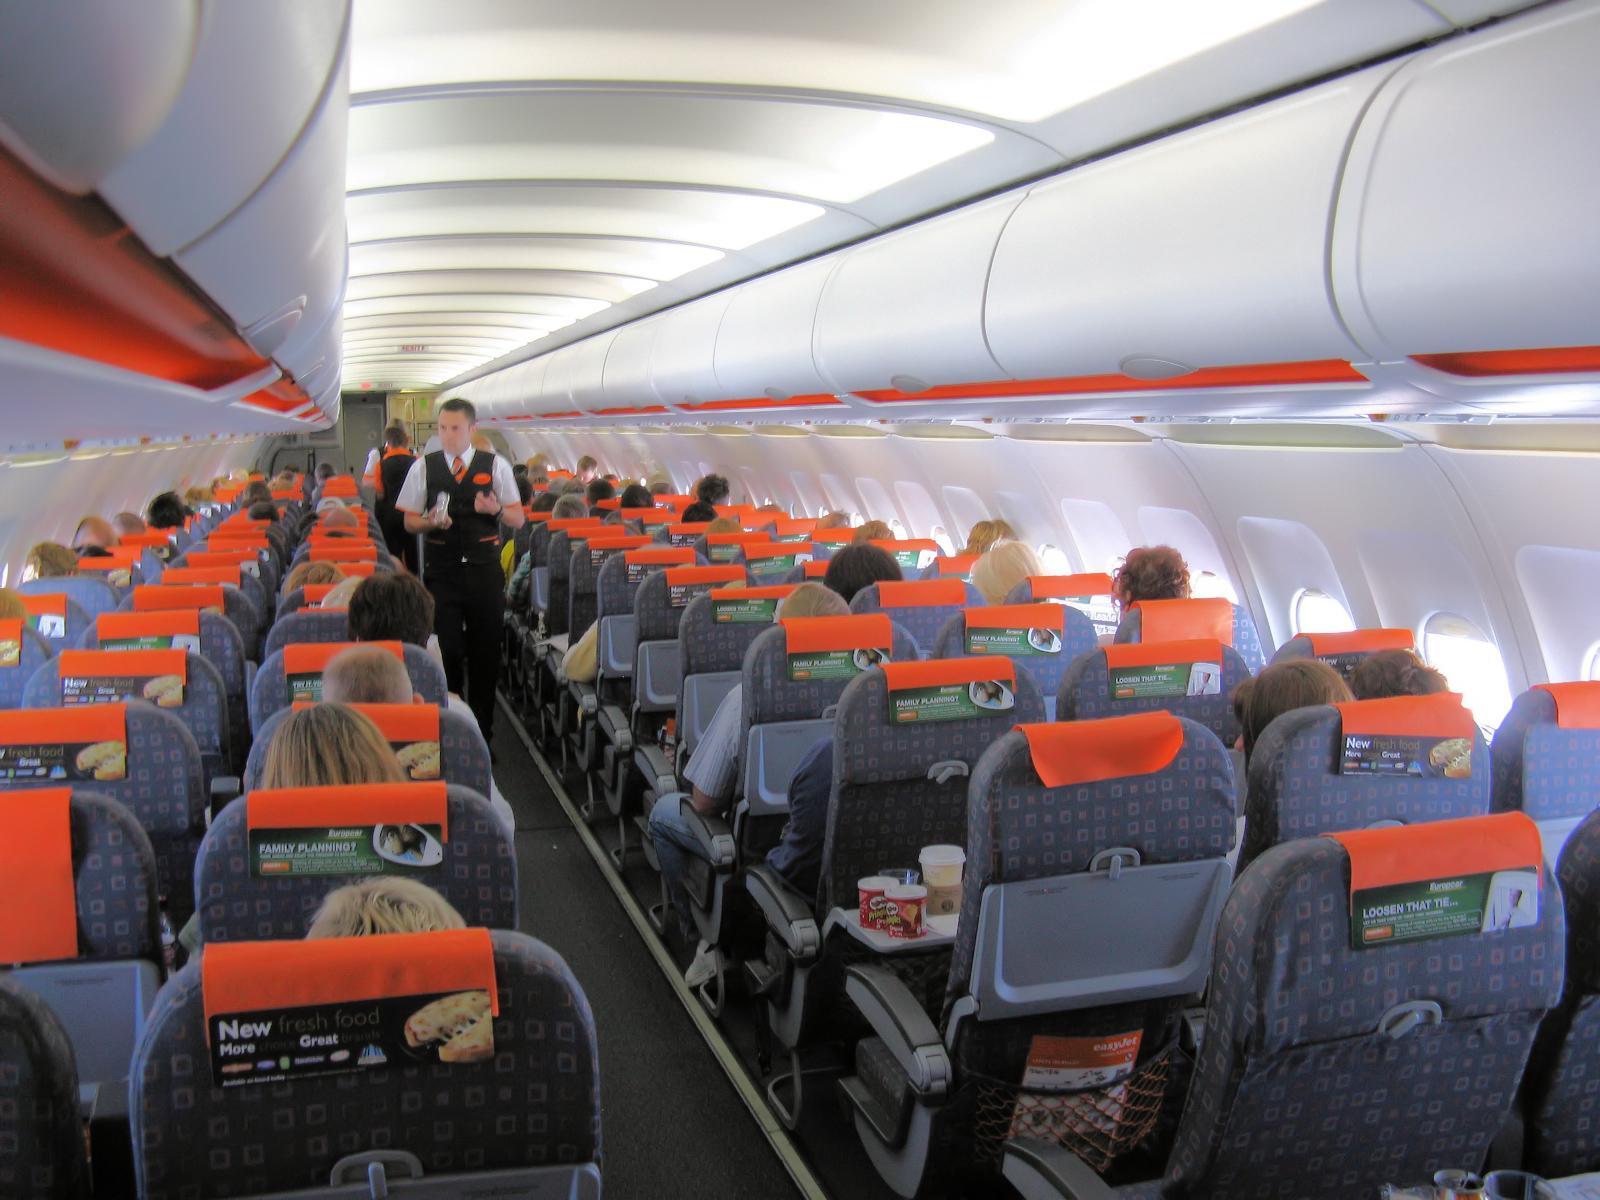 easyJet has a generous cabin baggage policy